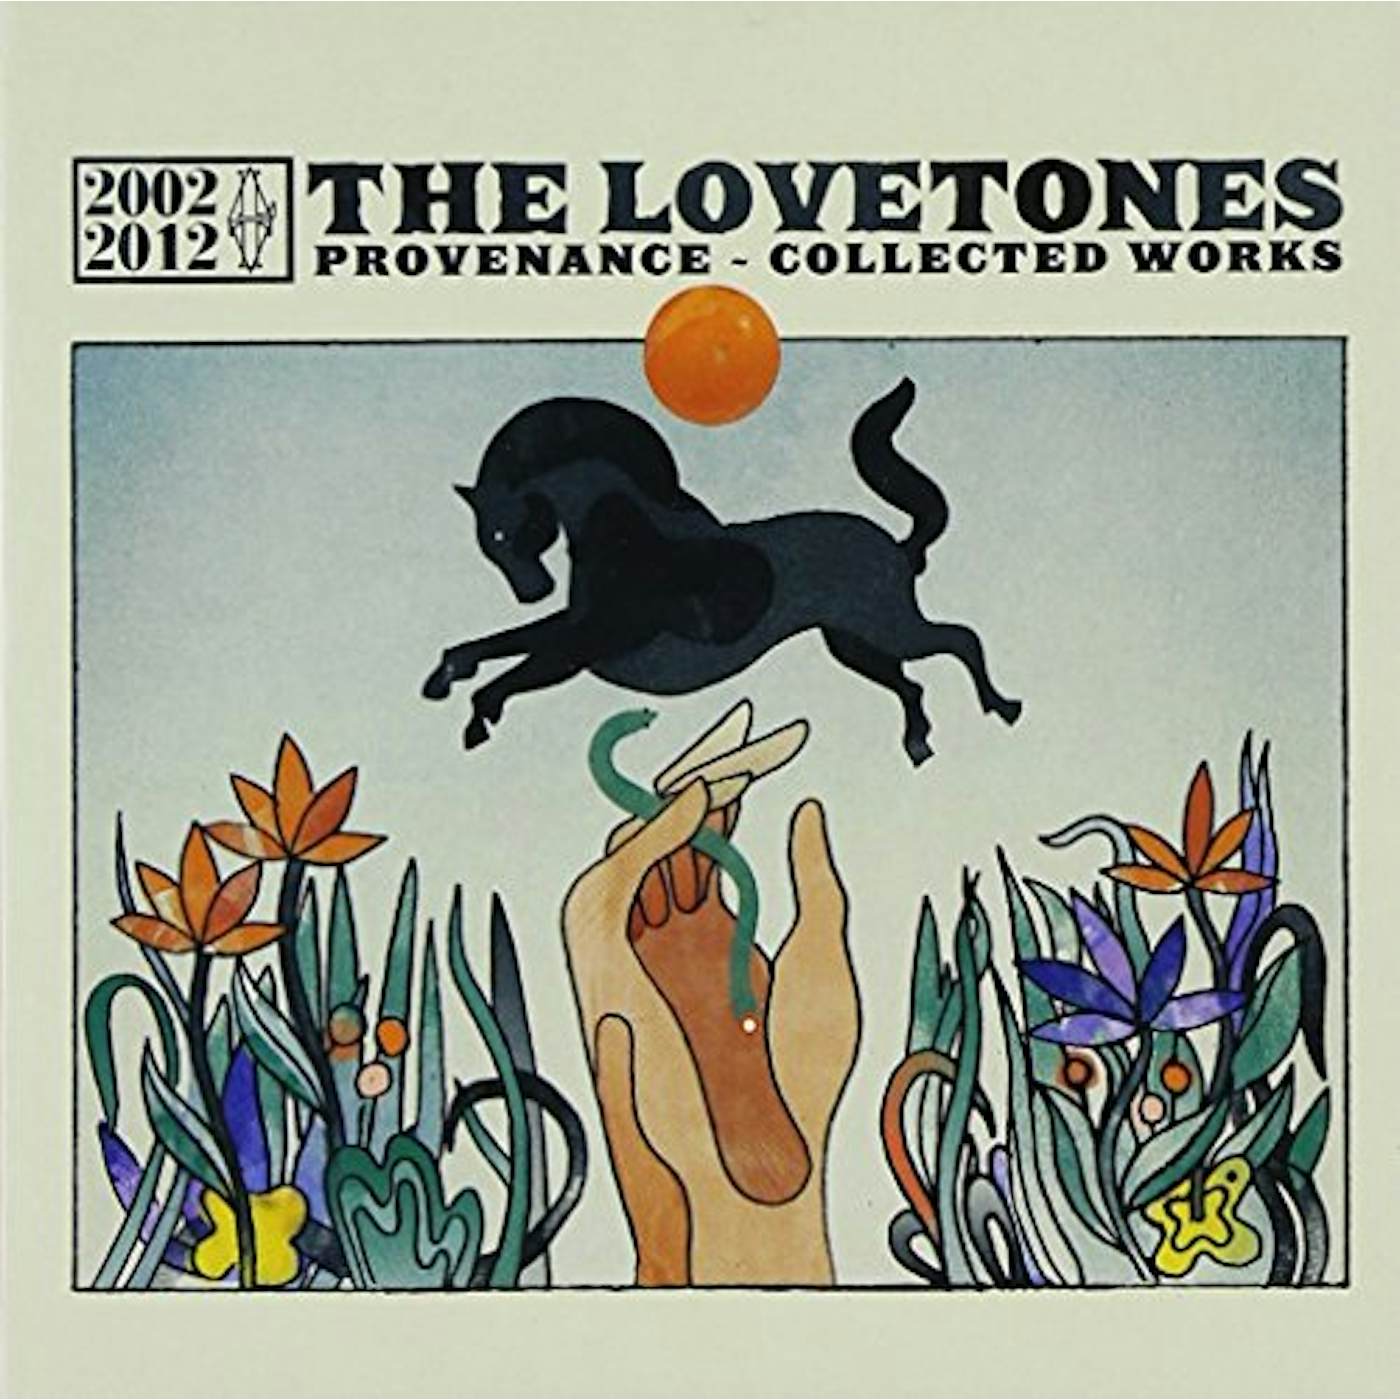 The Lovetones PROVENENCE-COLLECTED WORKS CD